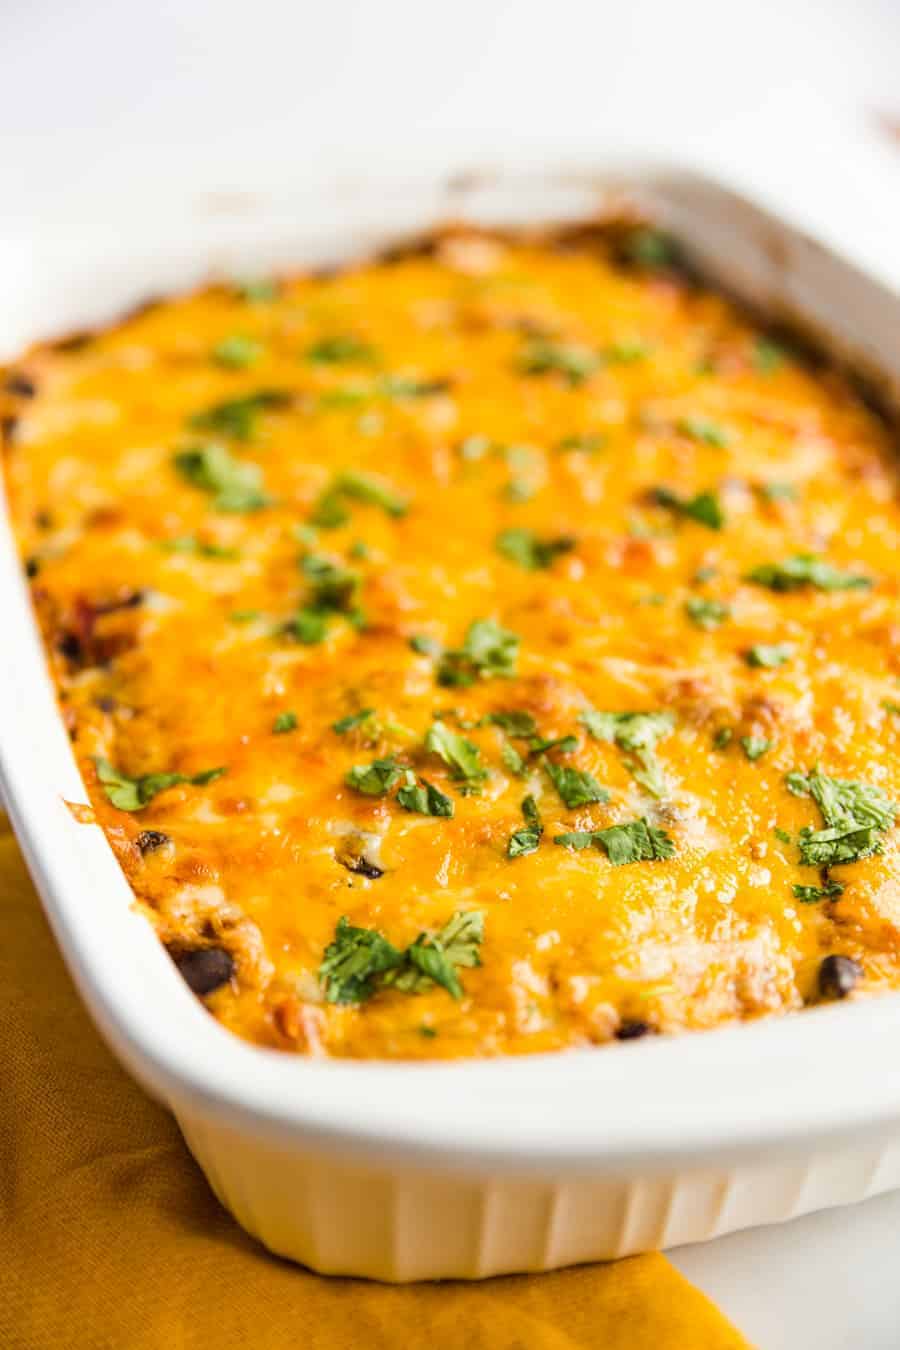 This easy, meatless meal is like a rice-and-bean-layered enchilada casserole. Topped with green or red enchilada sauce (you pick!) and cheese, you'll be satisfied with this savory rendition of a classic Tex-Mex dish.